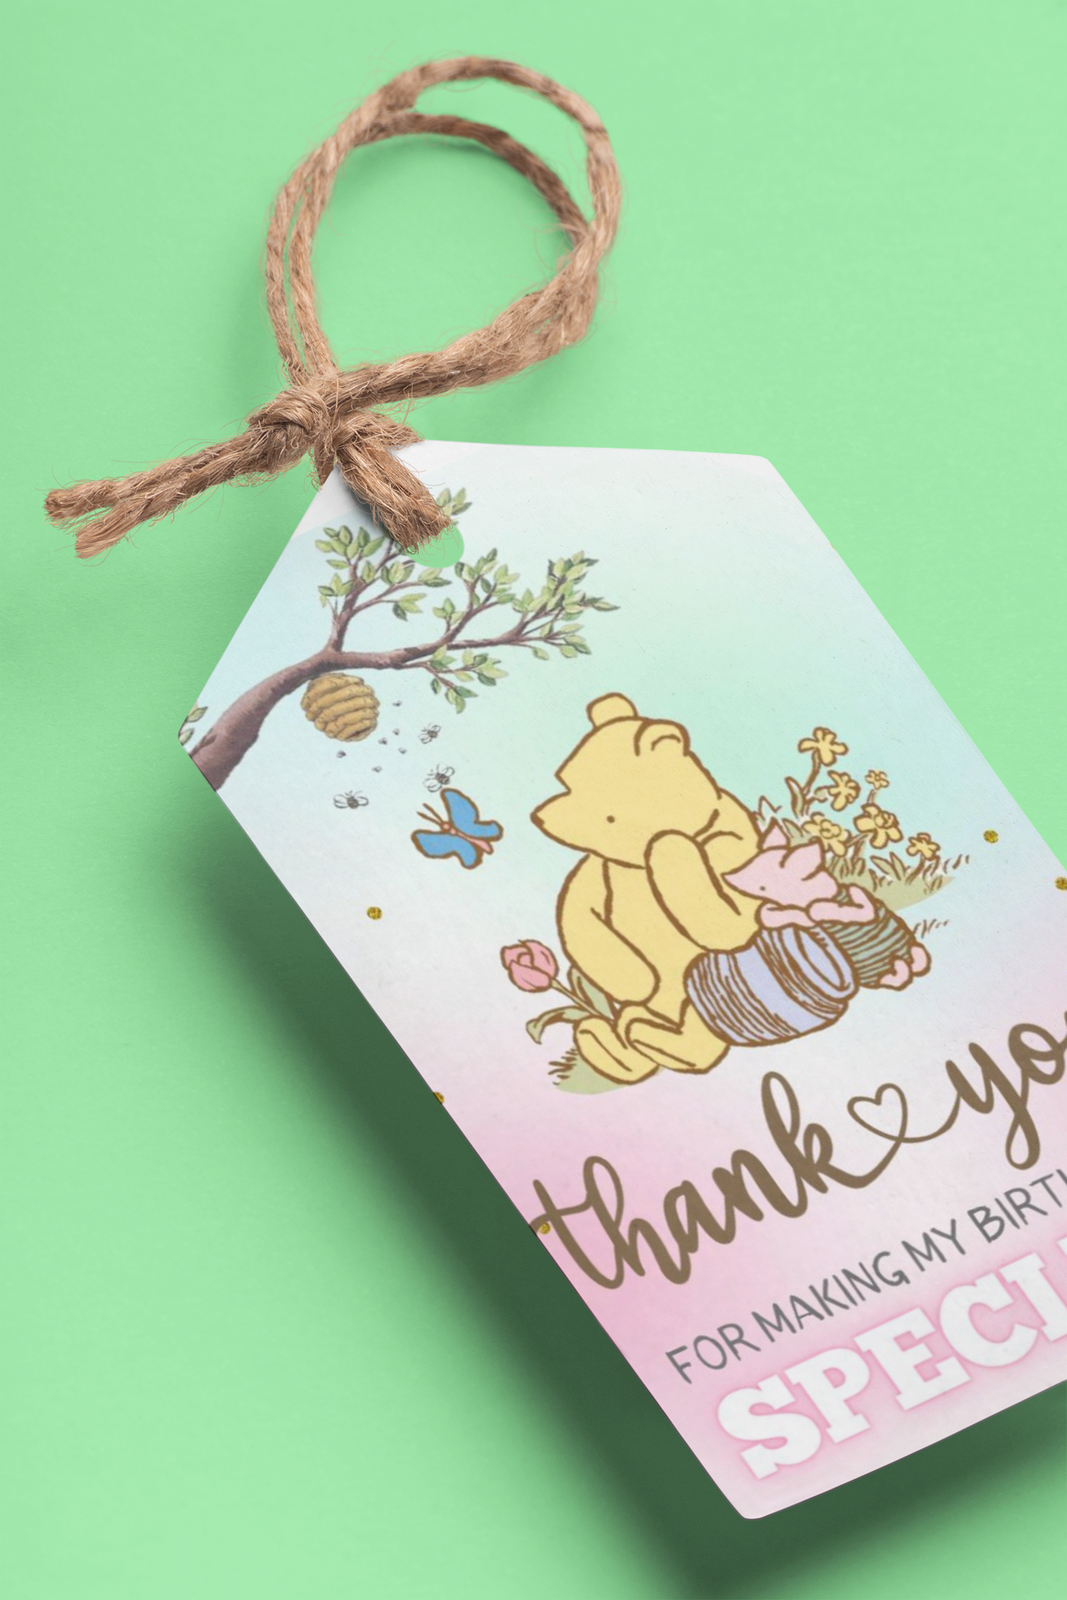 Winnie The Pooh Theme Model 2 Birthday Favour Tags (2 x 3.5 inches/250 GSM Cardstock/Green, Brown, Light blue, White & Pink/30Pcs)